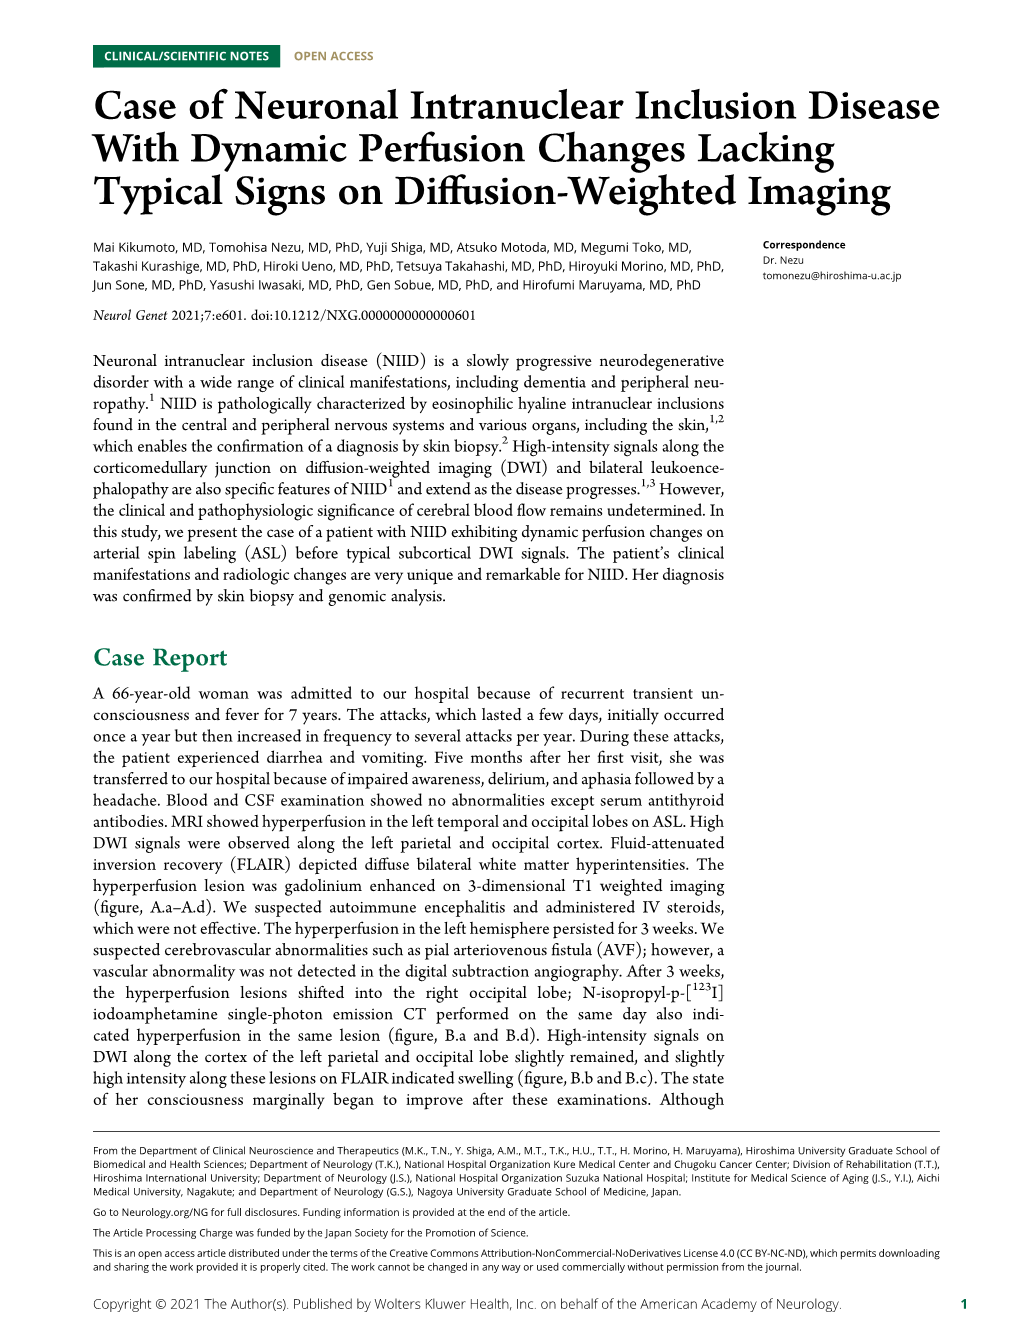 Case of Neuronal Intranuclear Inclusion Disease with Dynamic Perfusion Changes Lacking Typical Signs on Diffusion-Weighted Imagi